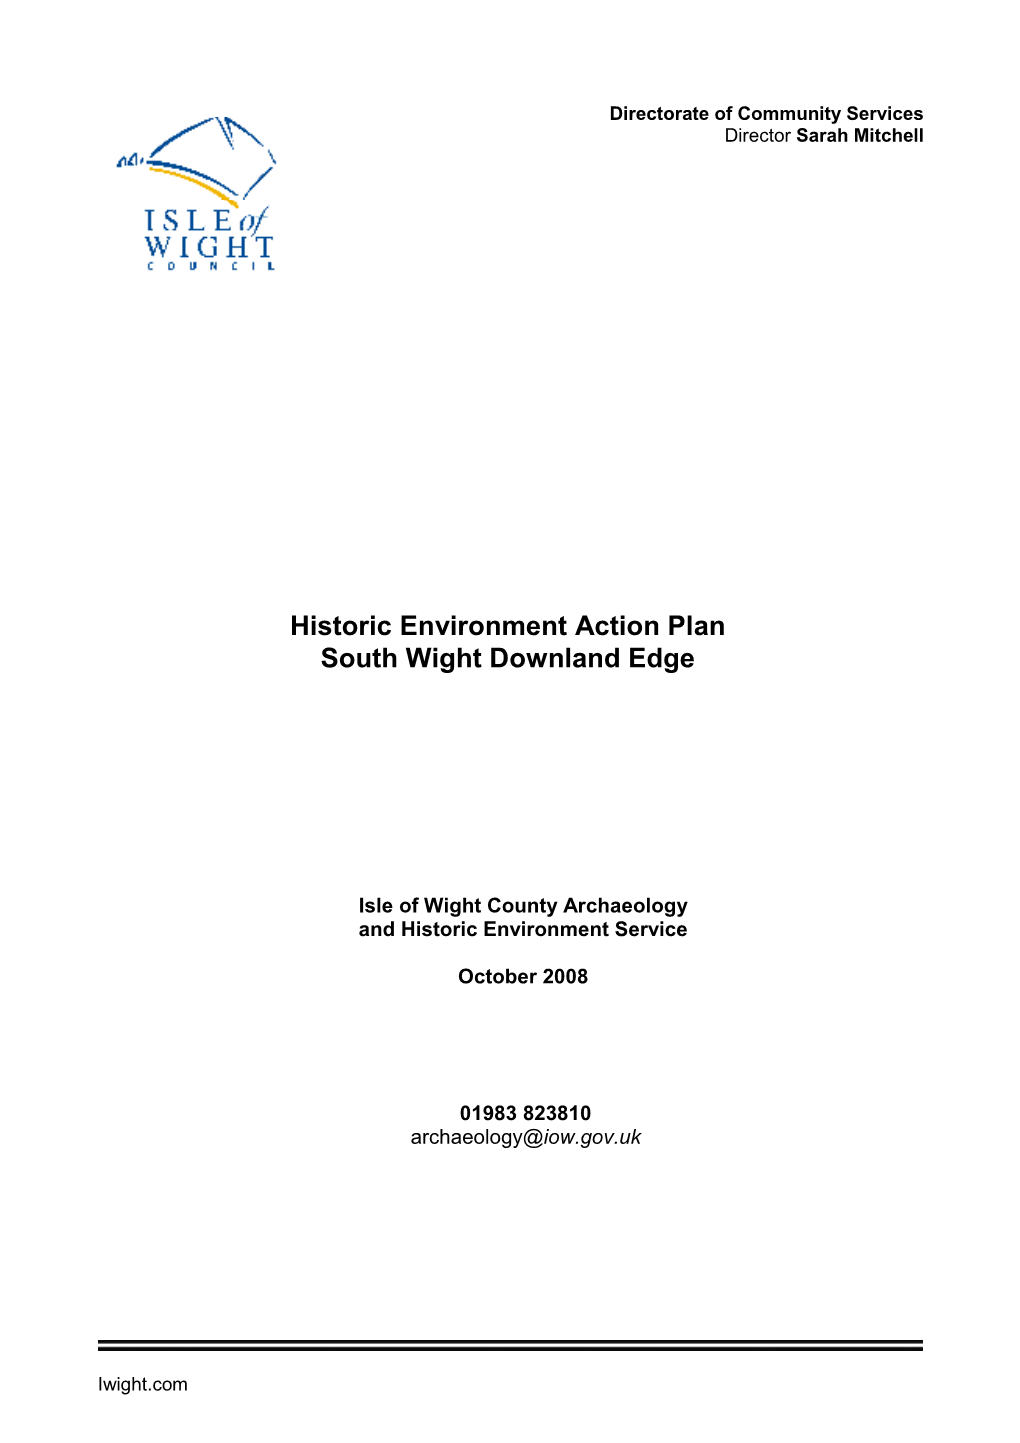 Historic Environment Action Plan South Wight Downland Edge